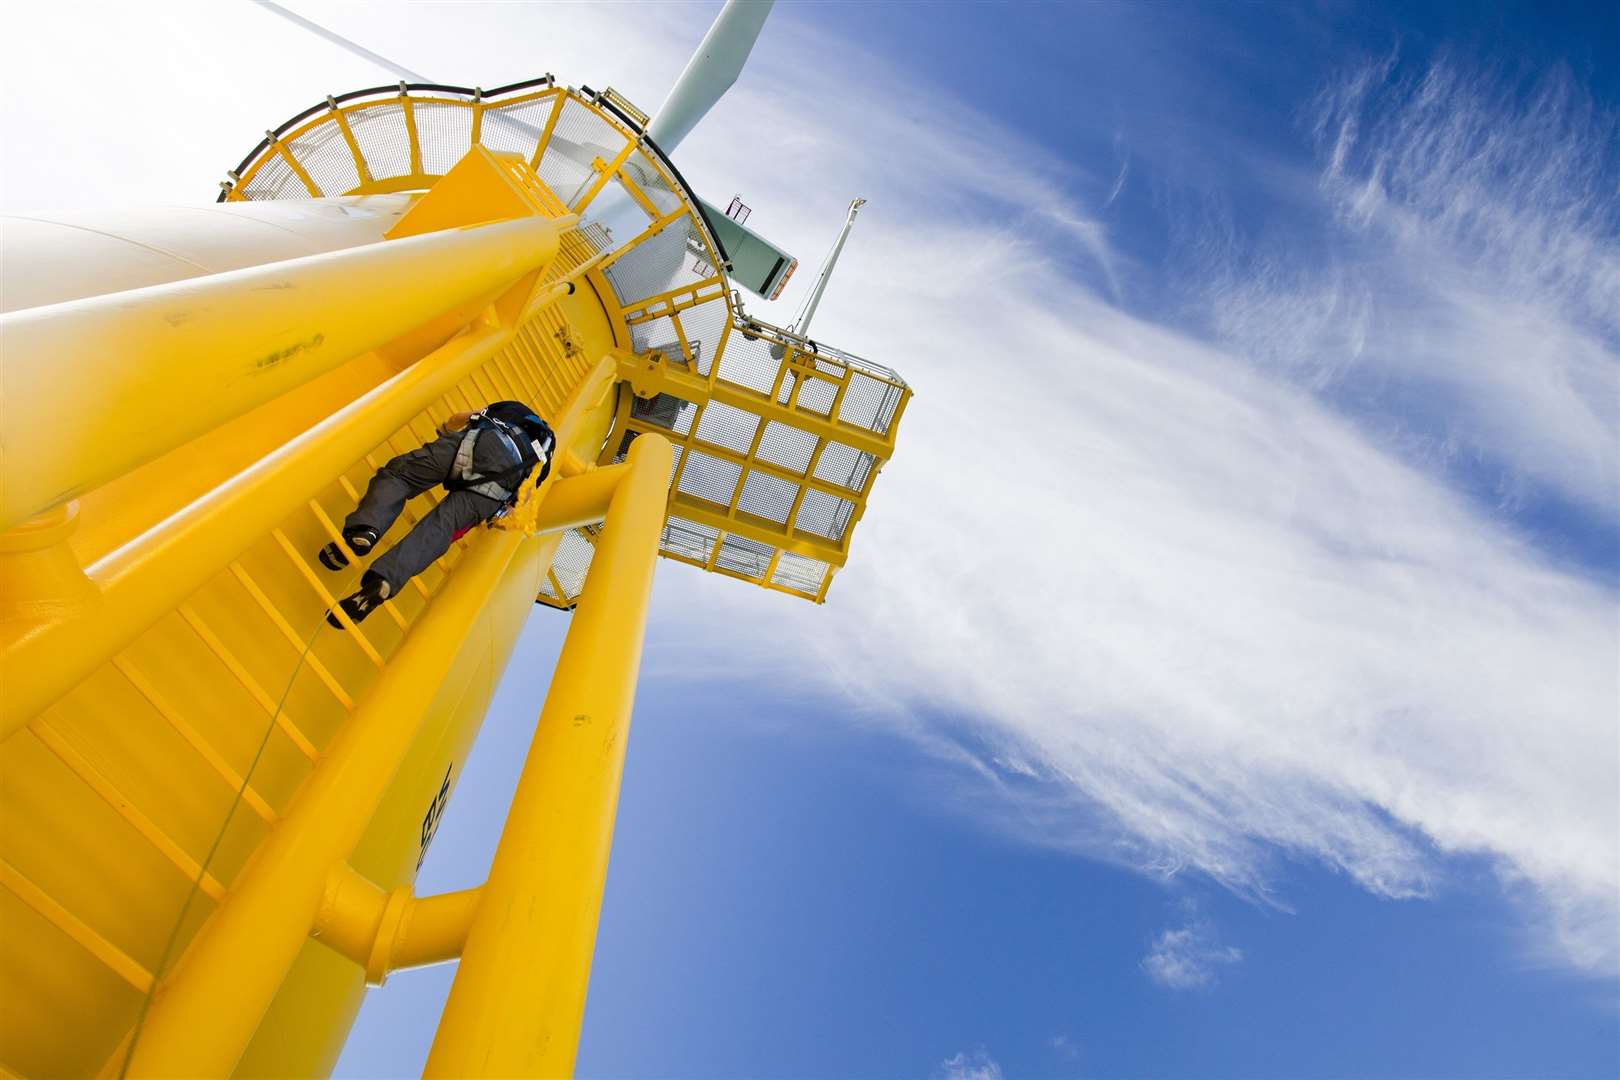 A worker climbs a turbine, at the Walney offshore wind farm which consists of 102, 3.6 MW turbines, giving a total capacity of the Walney project of 367.2 MW, enough to power 320,000 homes. The rotor diameter of the turbines is 107m for Walney 1 and 120 m for Walney 2. The wind farm is owned and constructed by Dong Energy. Cumbria, UK.